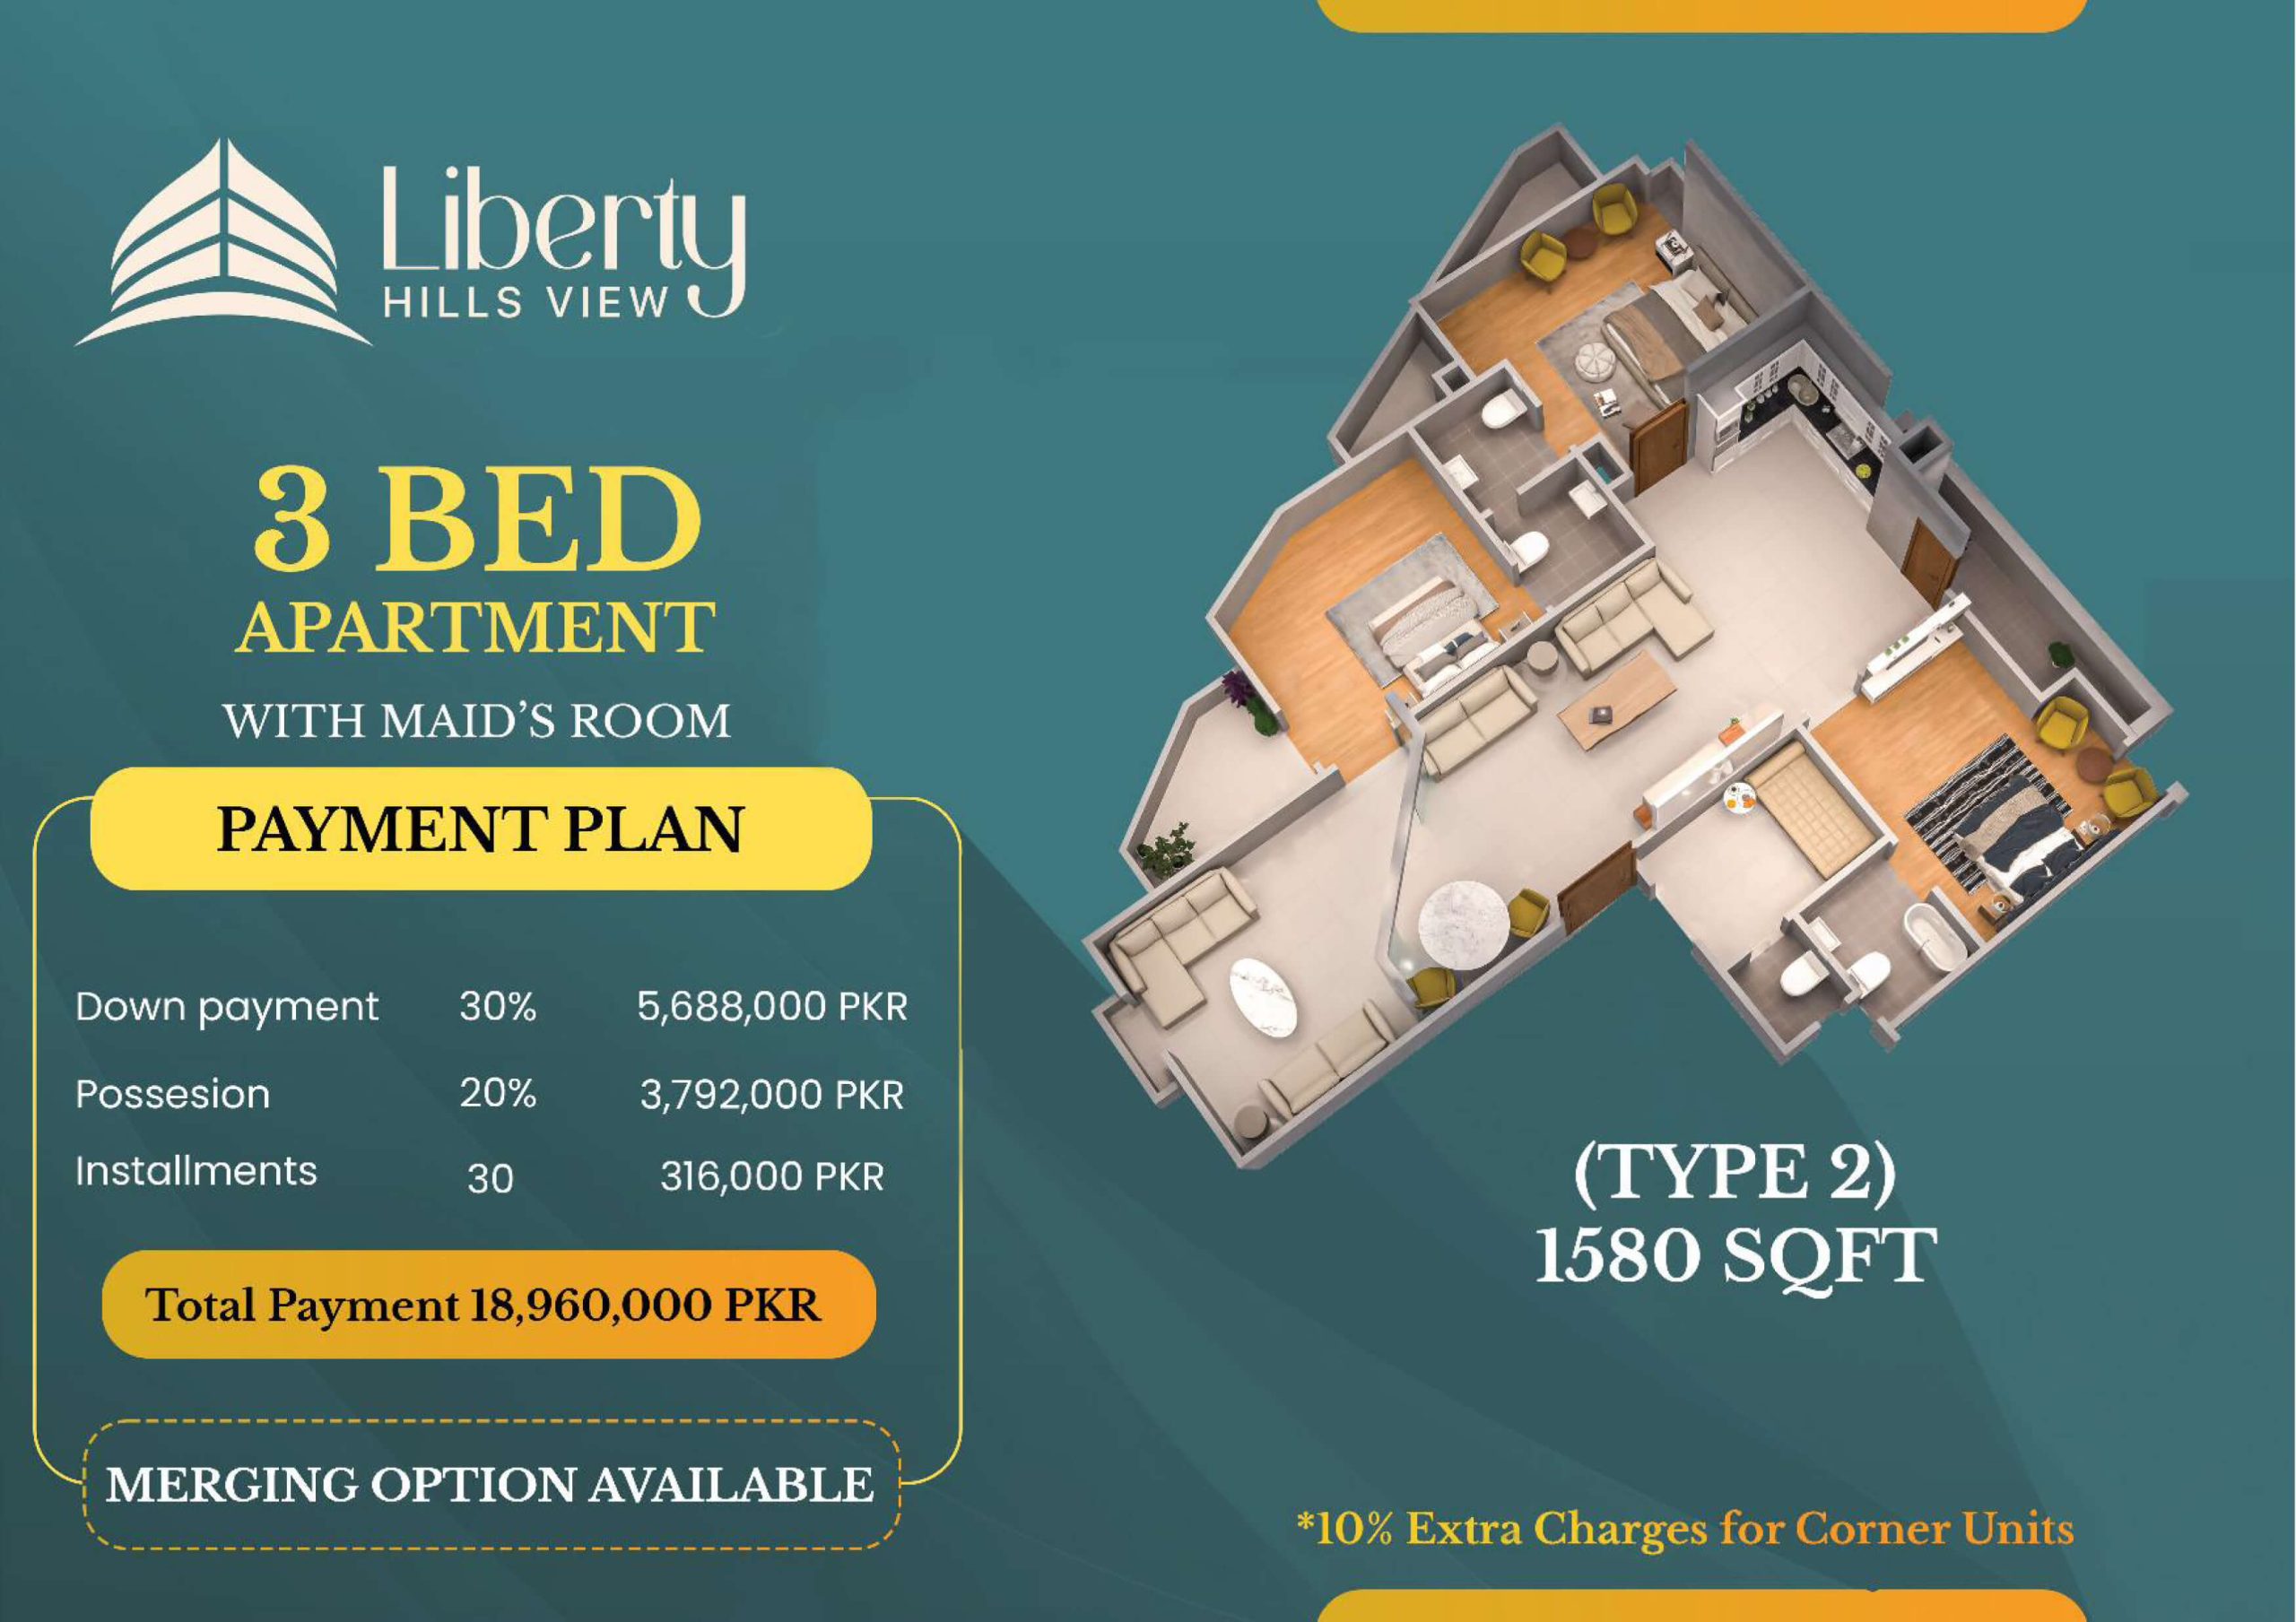 3 Bed Apartments with Maid's Room